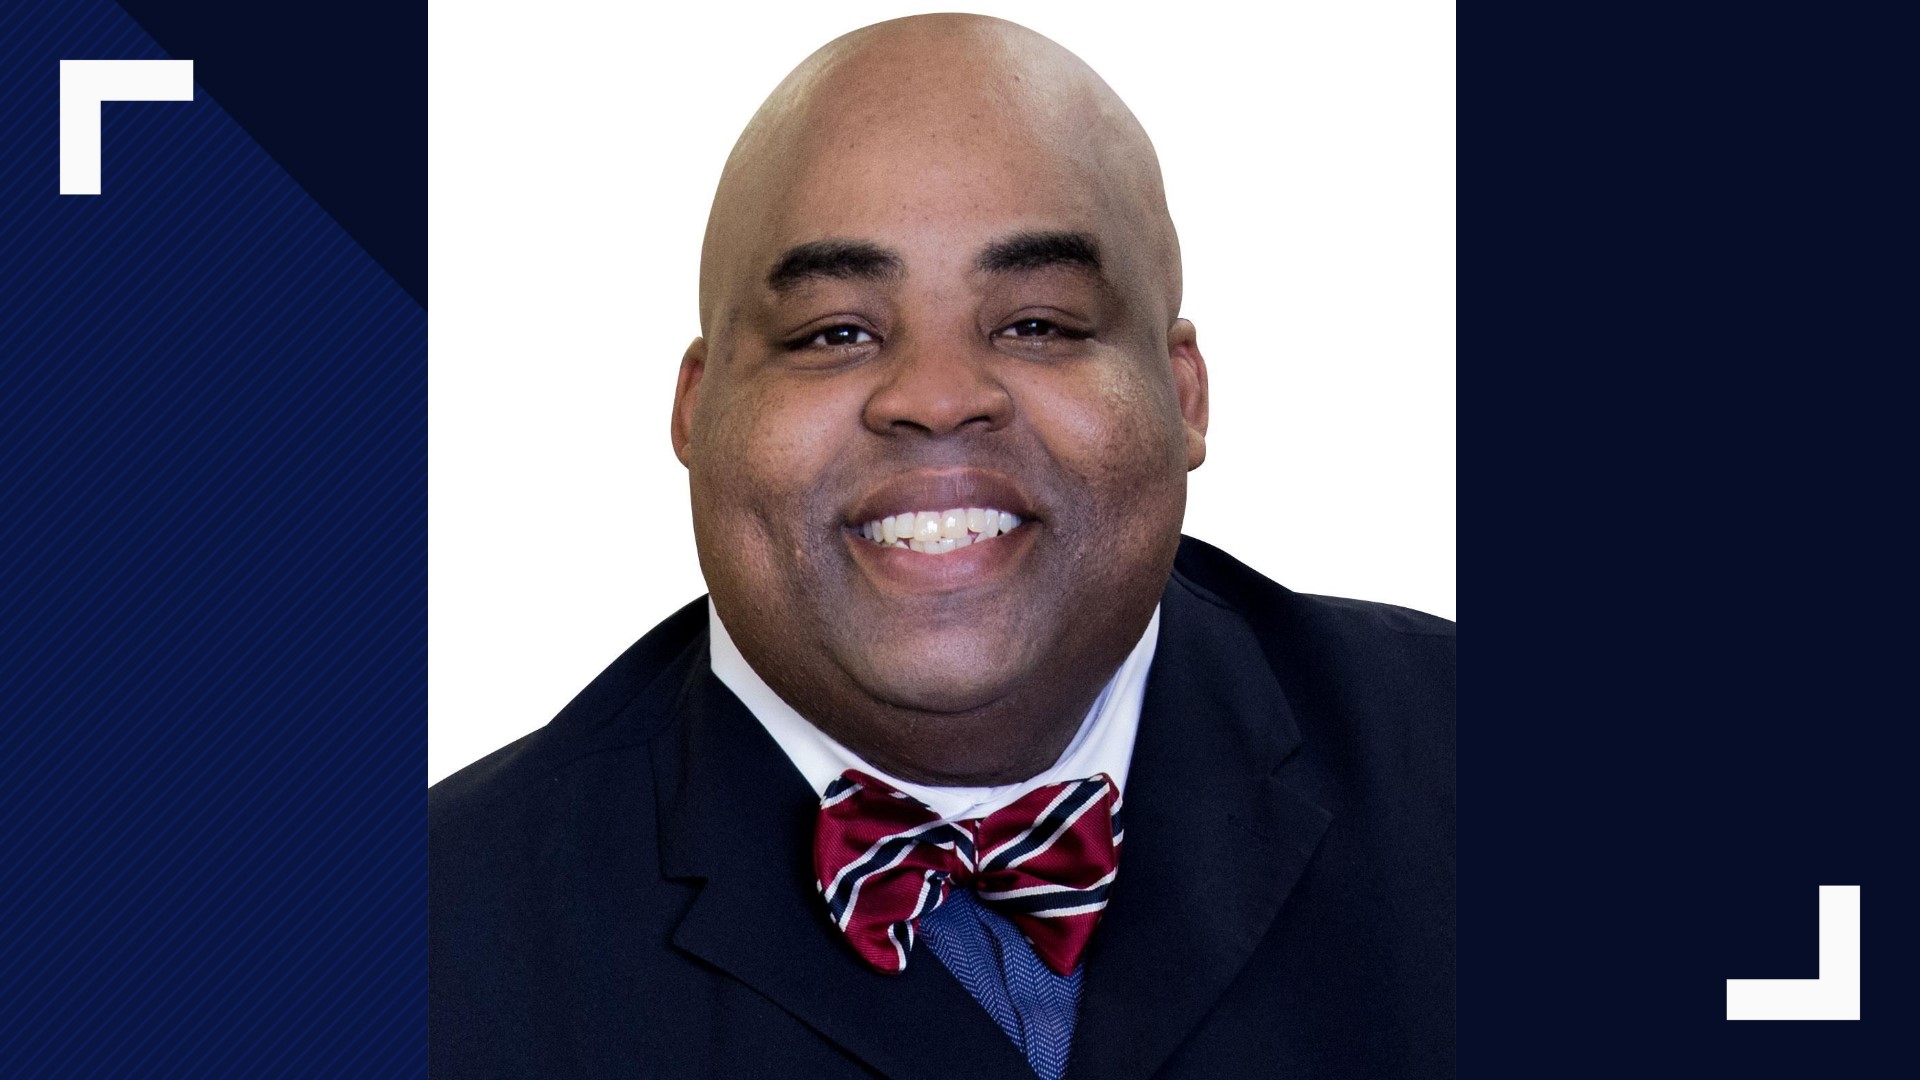 Waco ISD Superintendent Dr. Marcus Nelson was booked on a misdemeanor charge of possession of marijuana under two ounces on March 6.